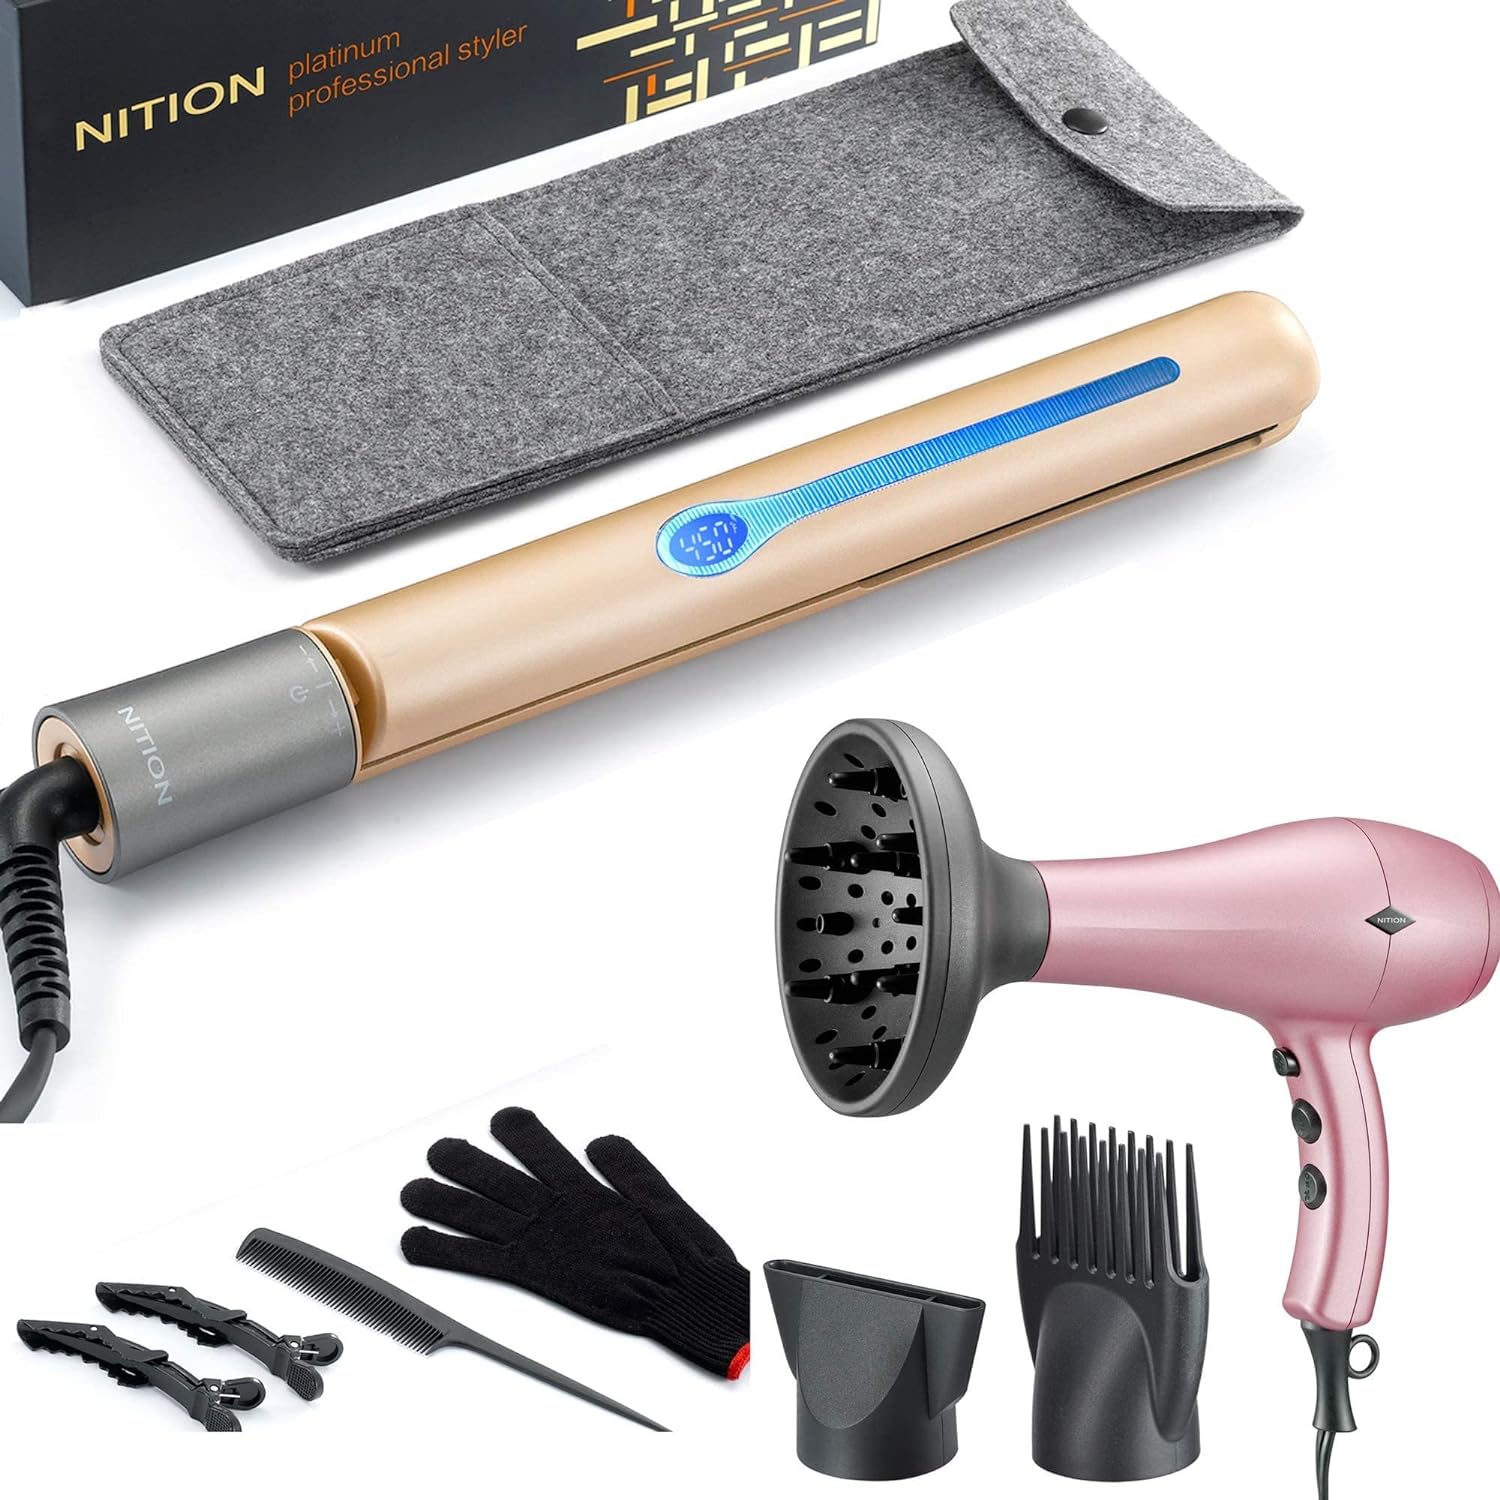 NITION Professional Salon Hair Straightener Flat Iron and Hair Dryer with 3 Attachments Diffuser/Comb Set